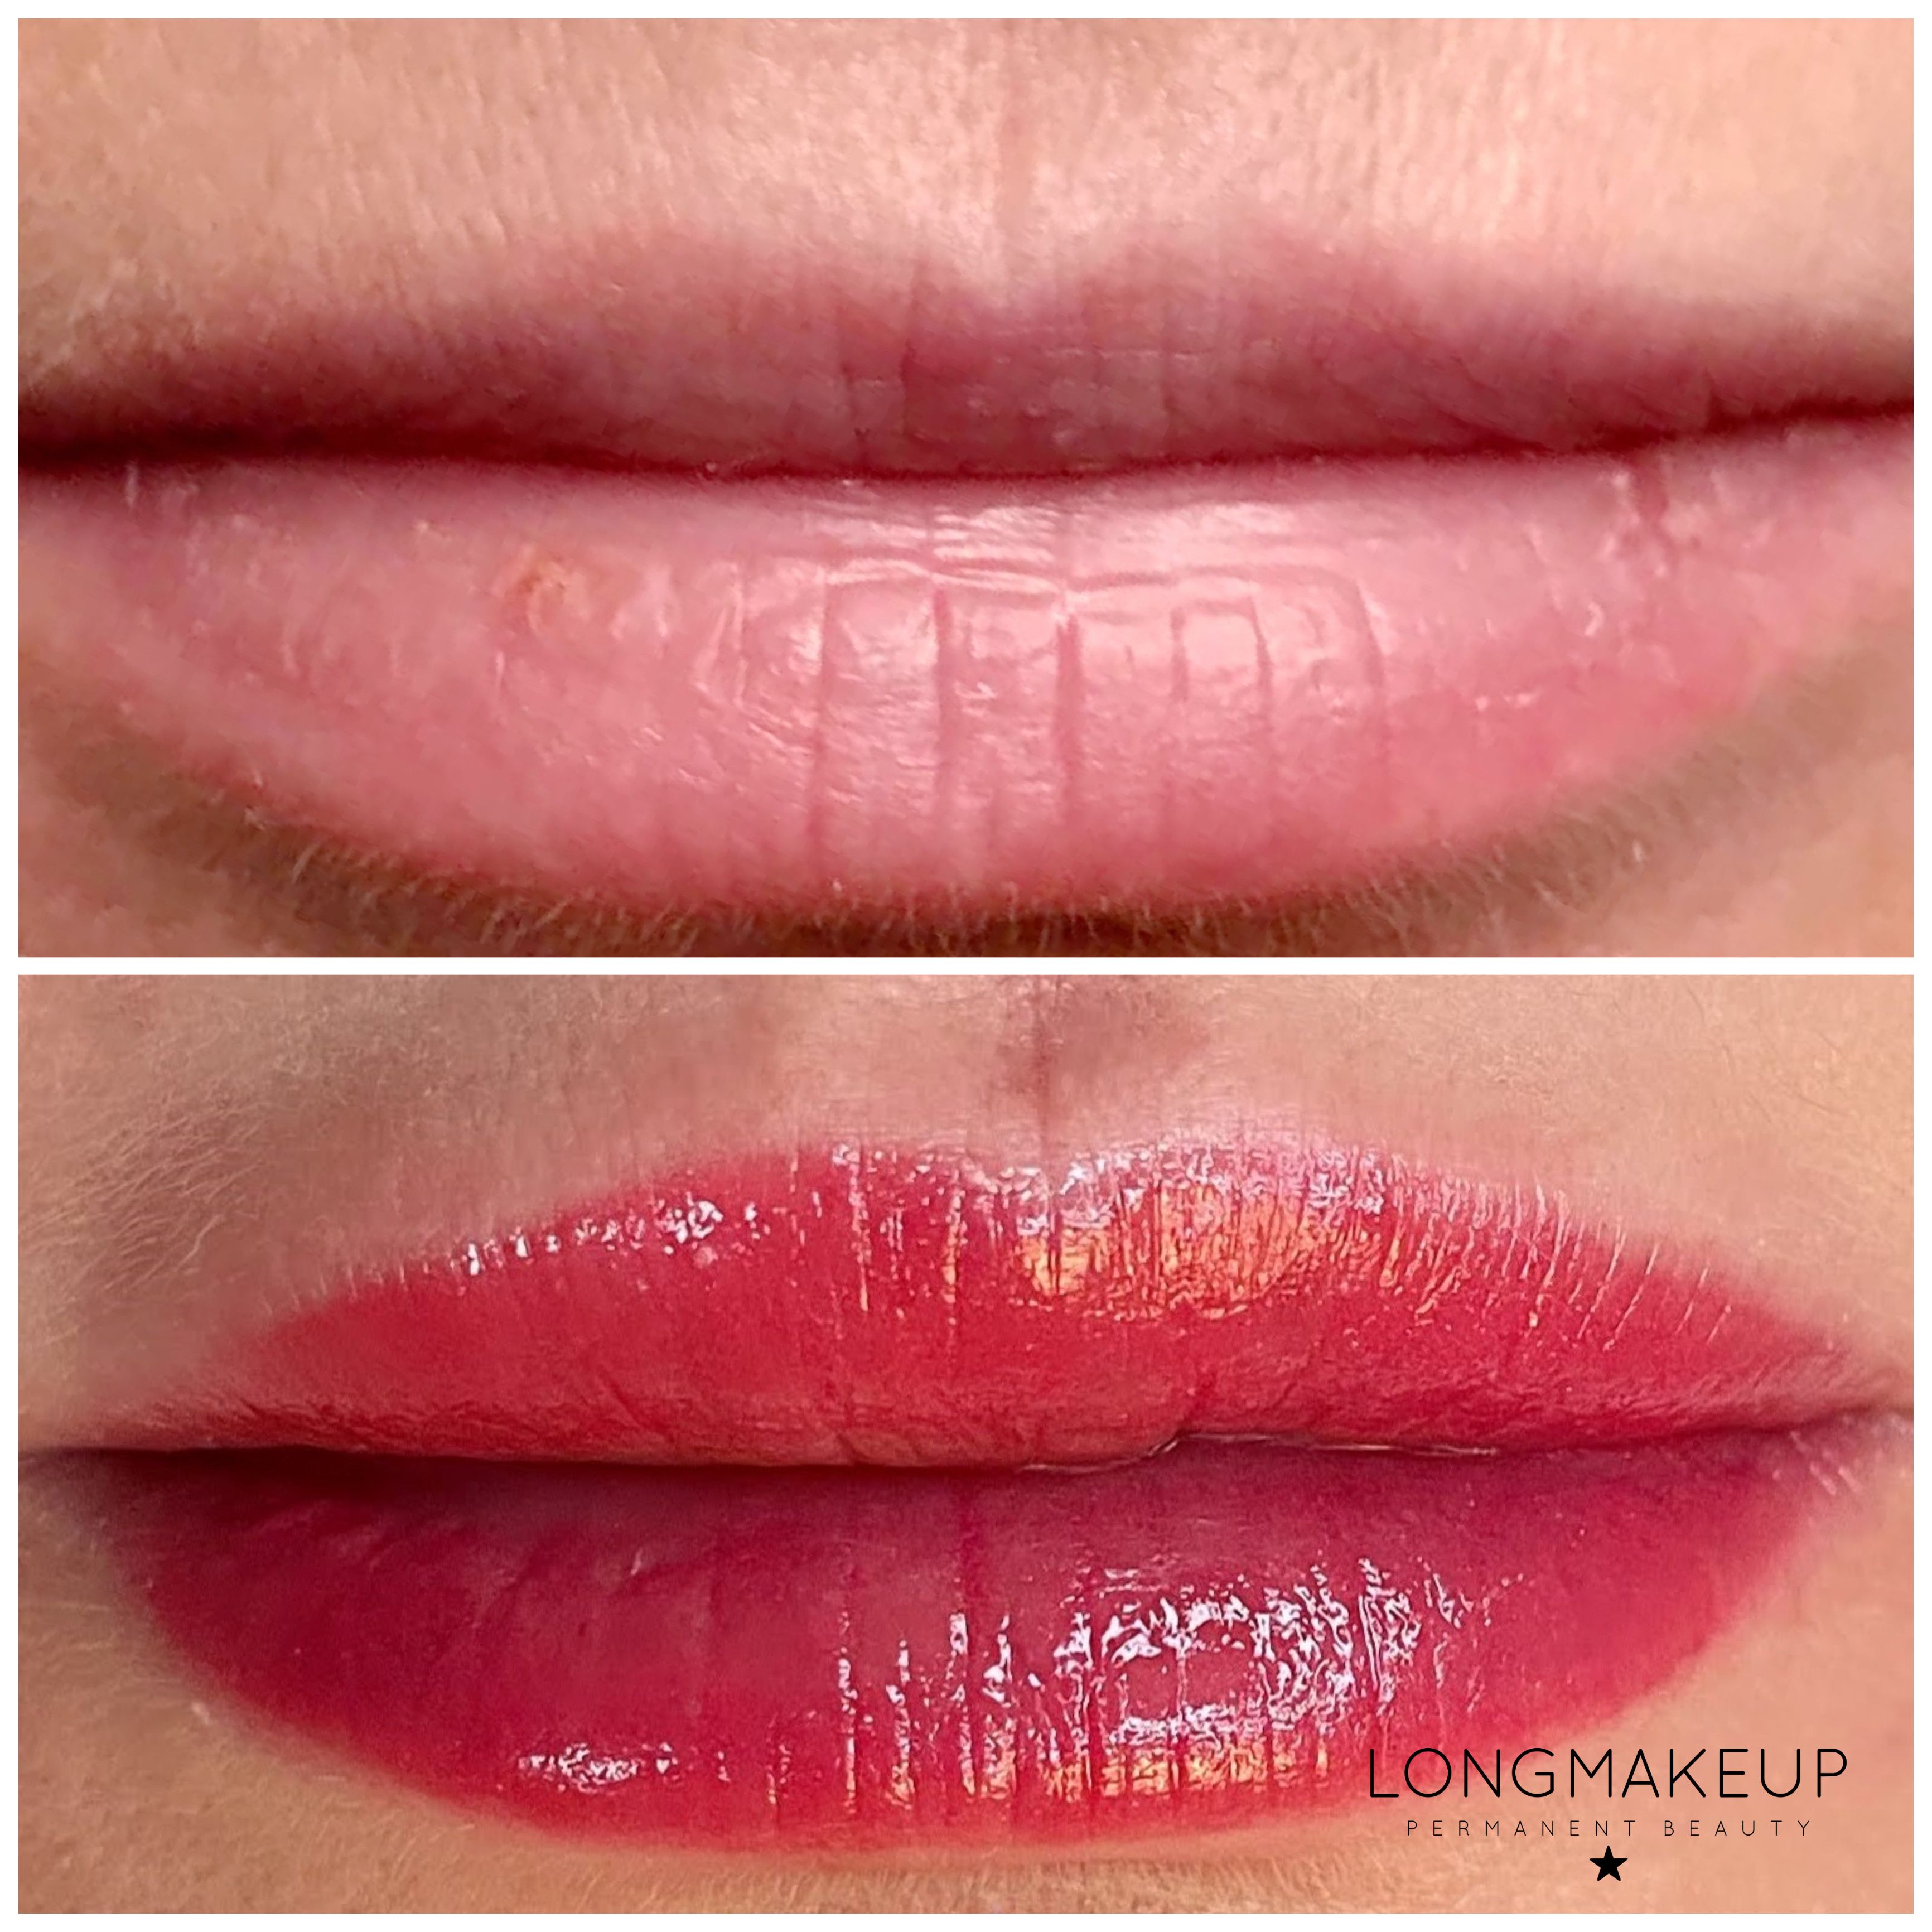 Lip Tattoo Before and After Lip Tattoo Pic Permanent Lipstick Images